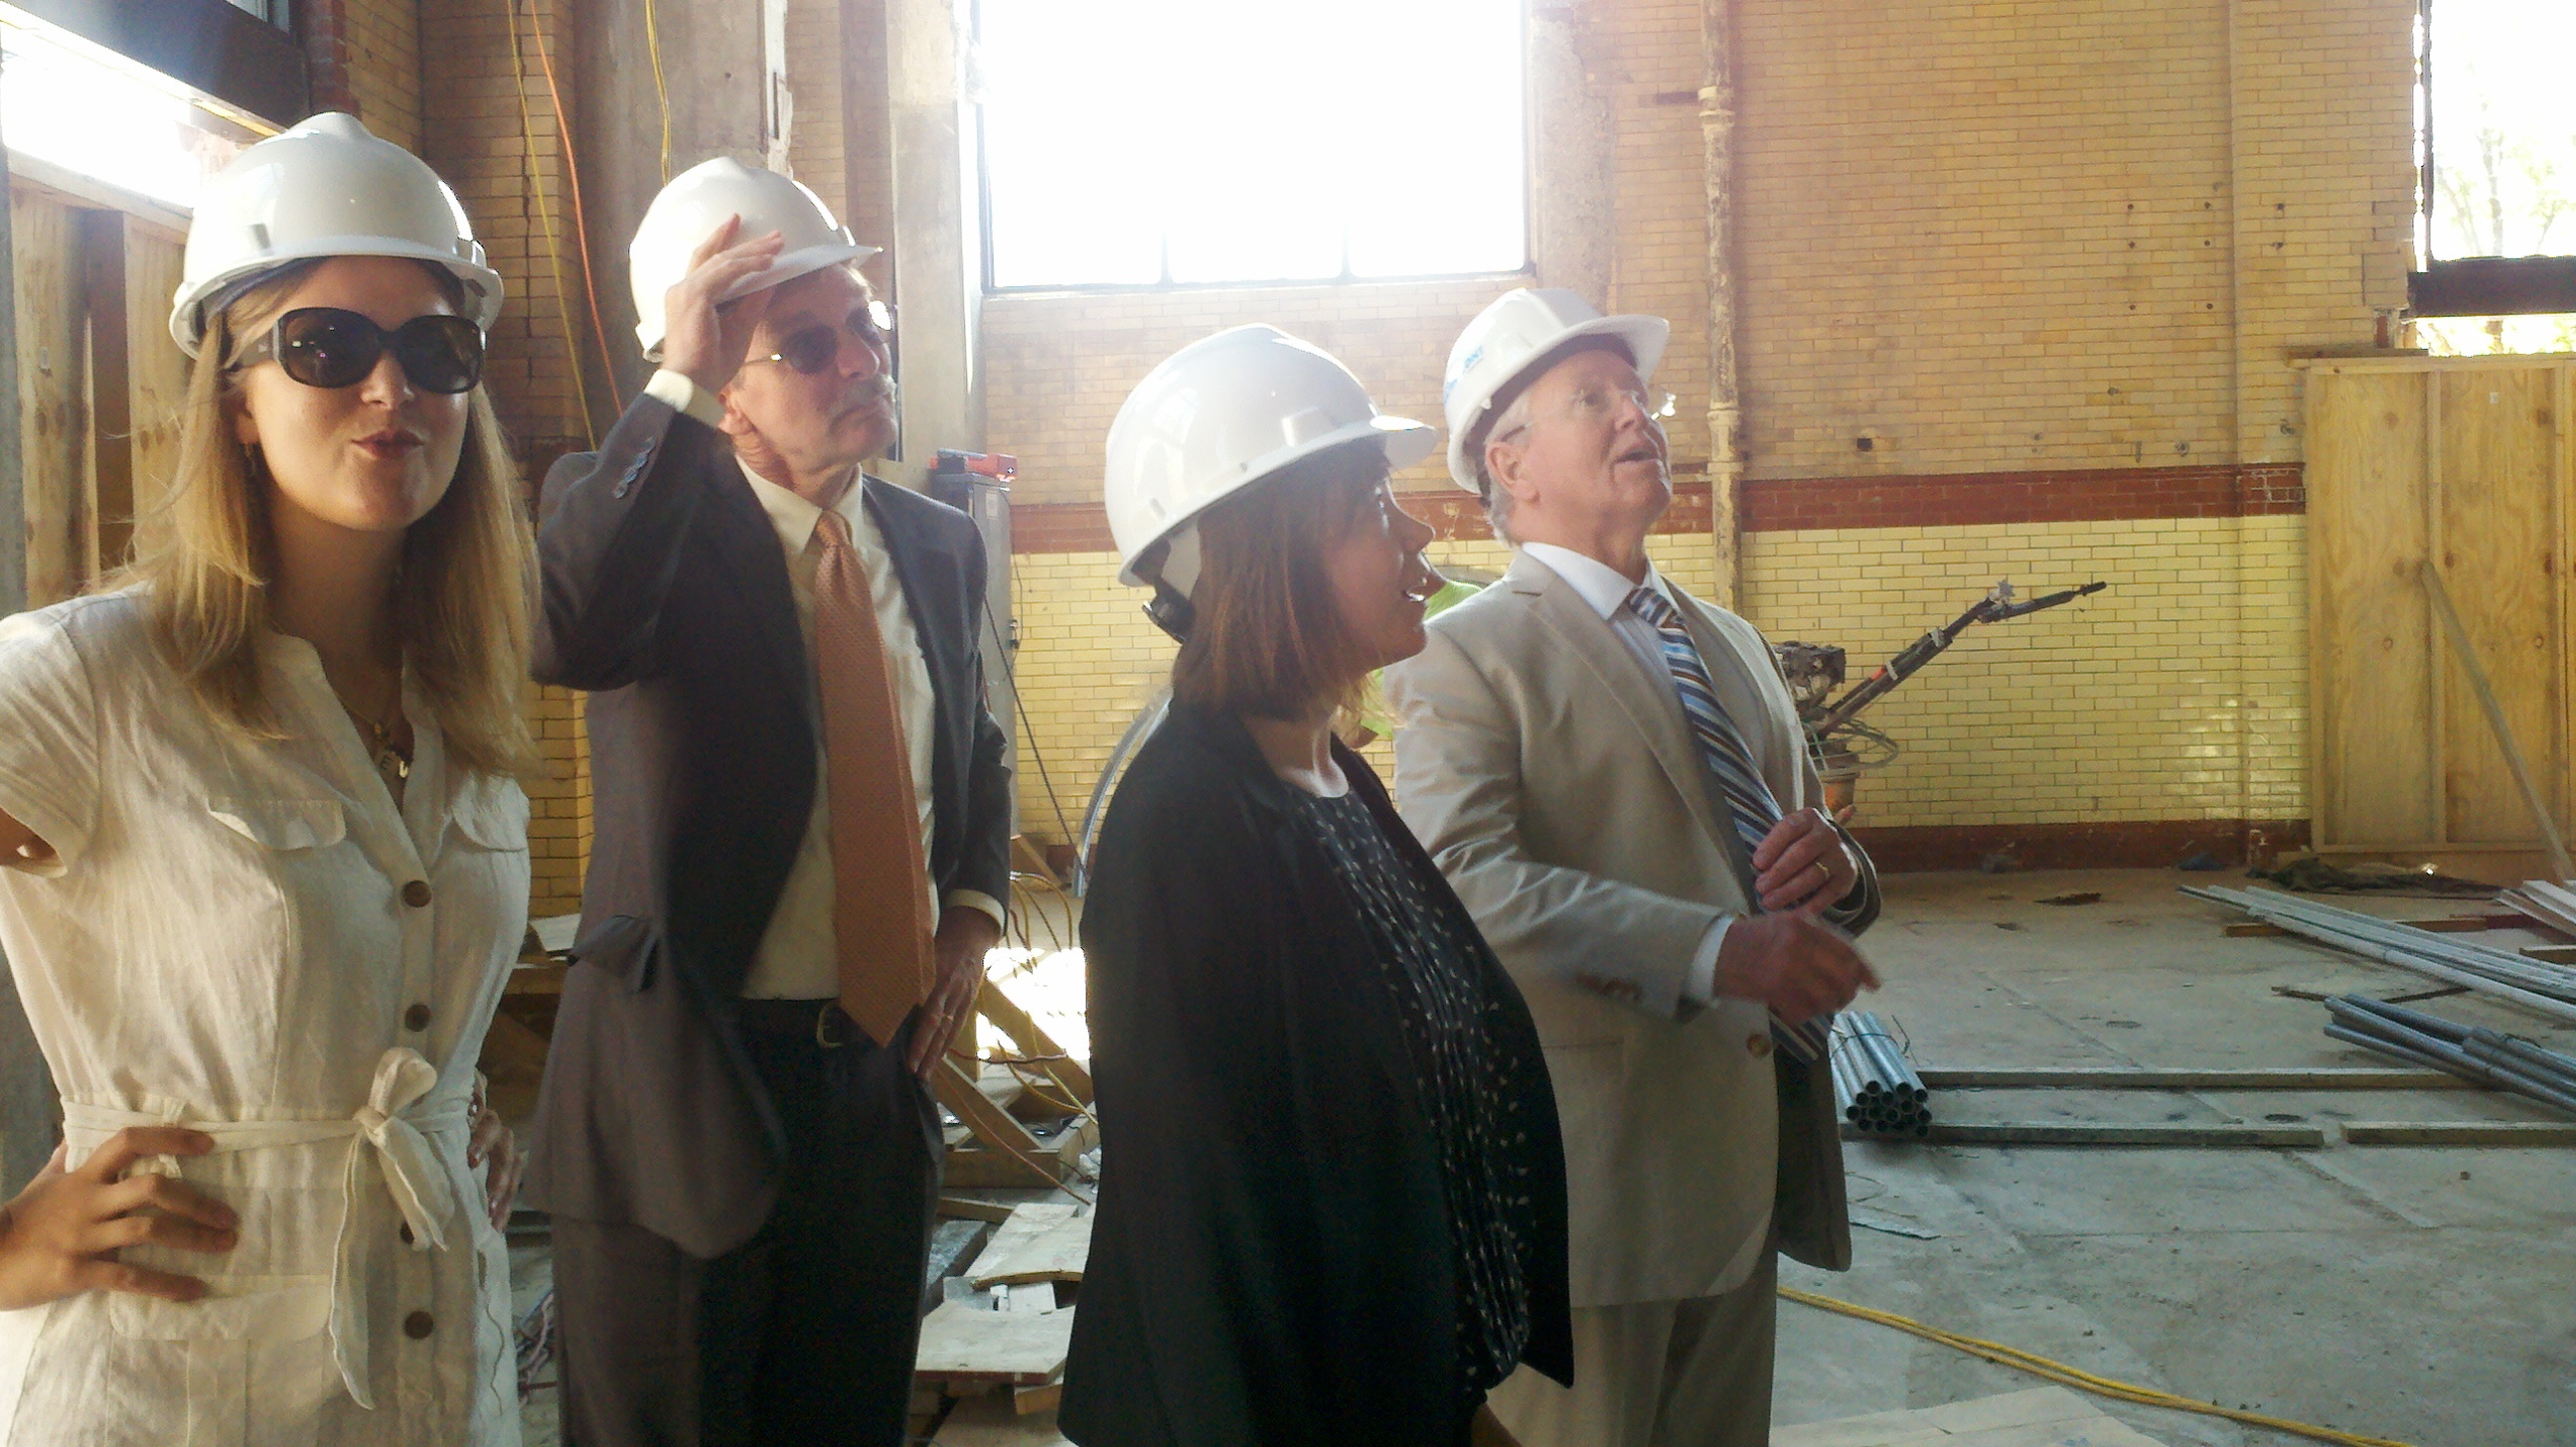 Philadelphia City Planning Commission Executive Director Gary Jastrzab - the man in back with his hand on his hard hat - joins DRWC Planners Lizzie Woods (next to Jastrzab) and Karen Thompson and DRWC President Tom Corcoran on a tour of the FringeArts building.